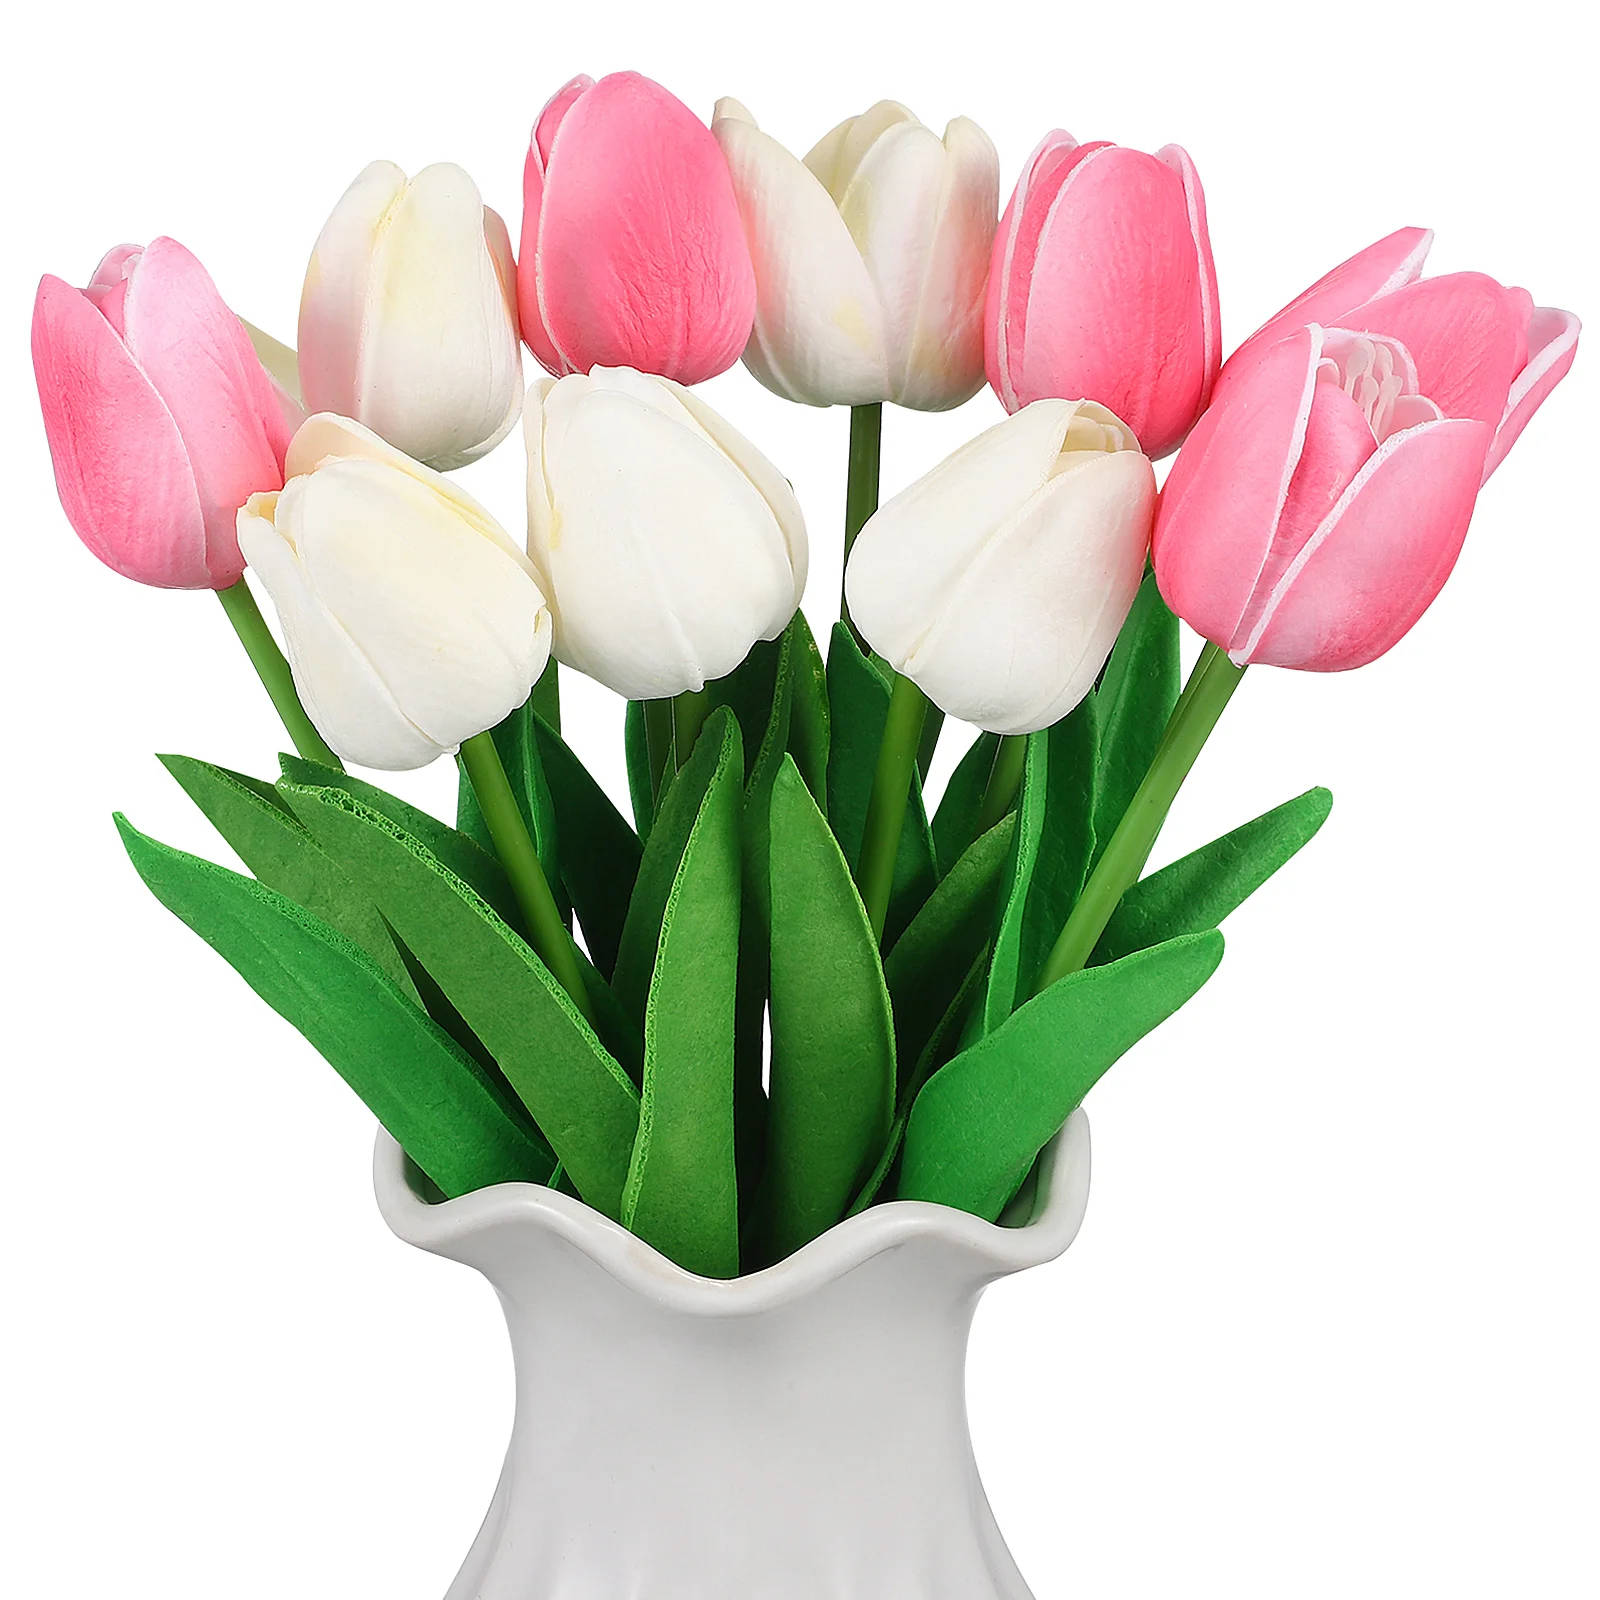 10 Pcs Artificial Tulips Fake Tulip Bouquets Flower Arrangement Props for Home Room Party Wedding